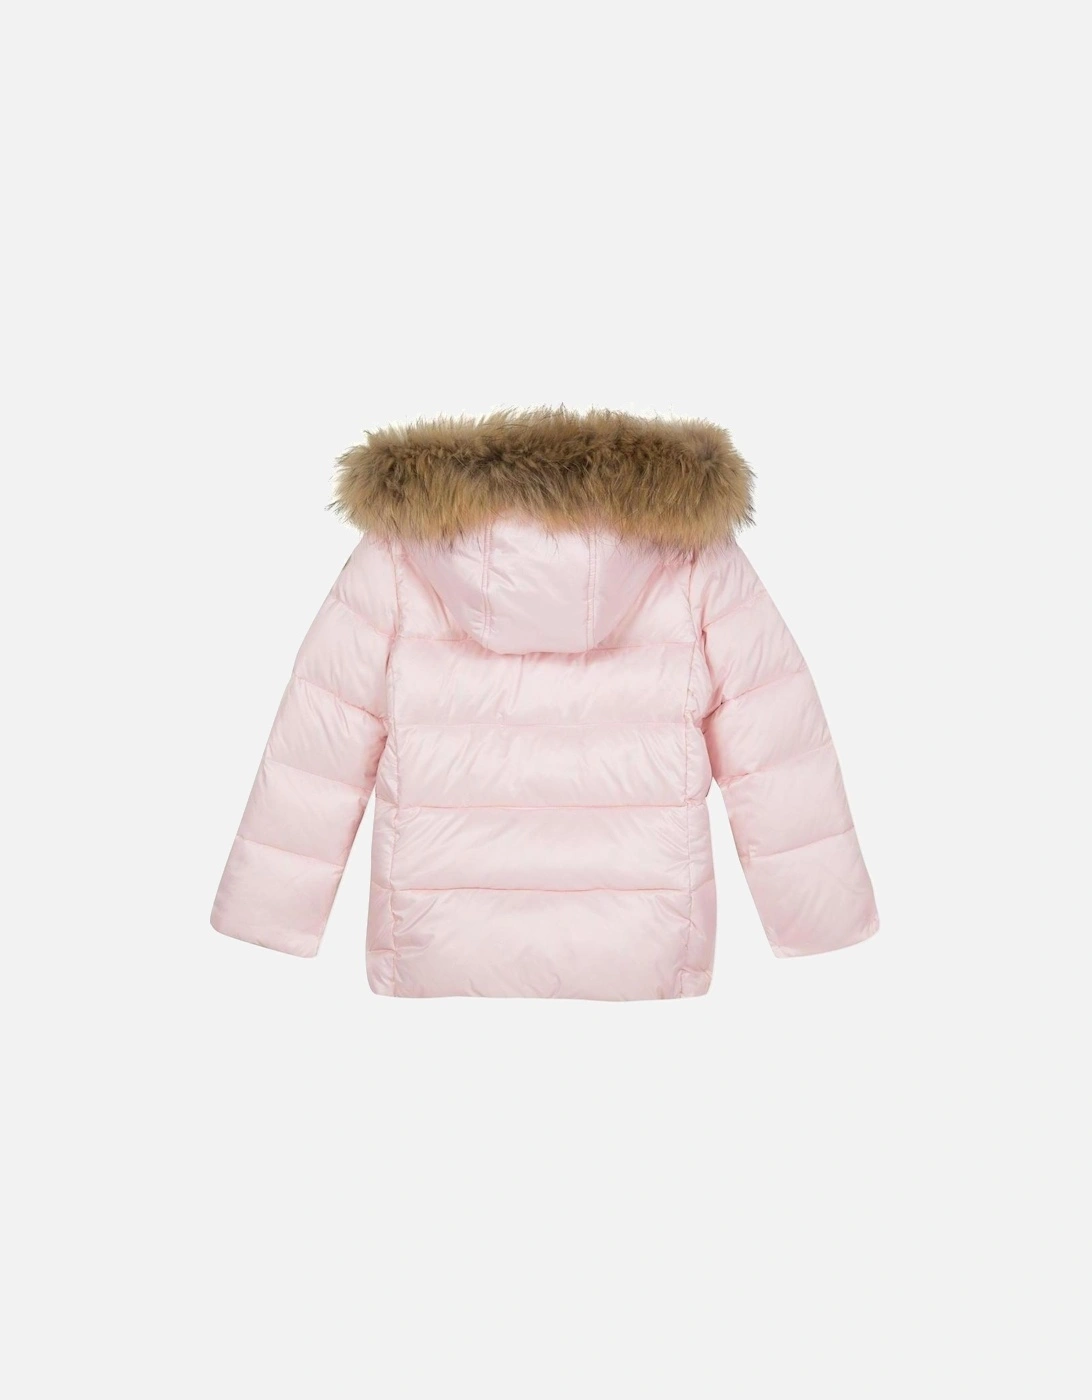 Girls Pale Pink Padded Down Jacket